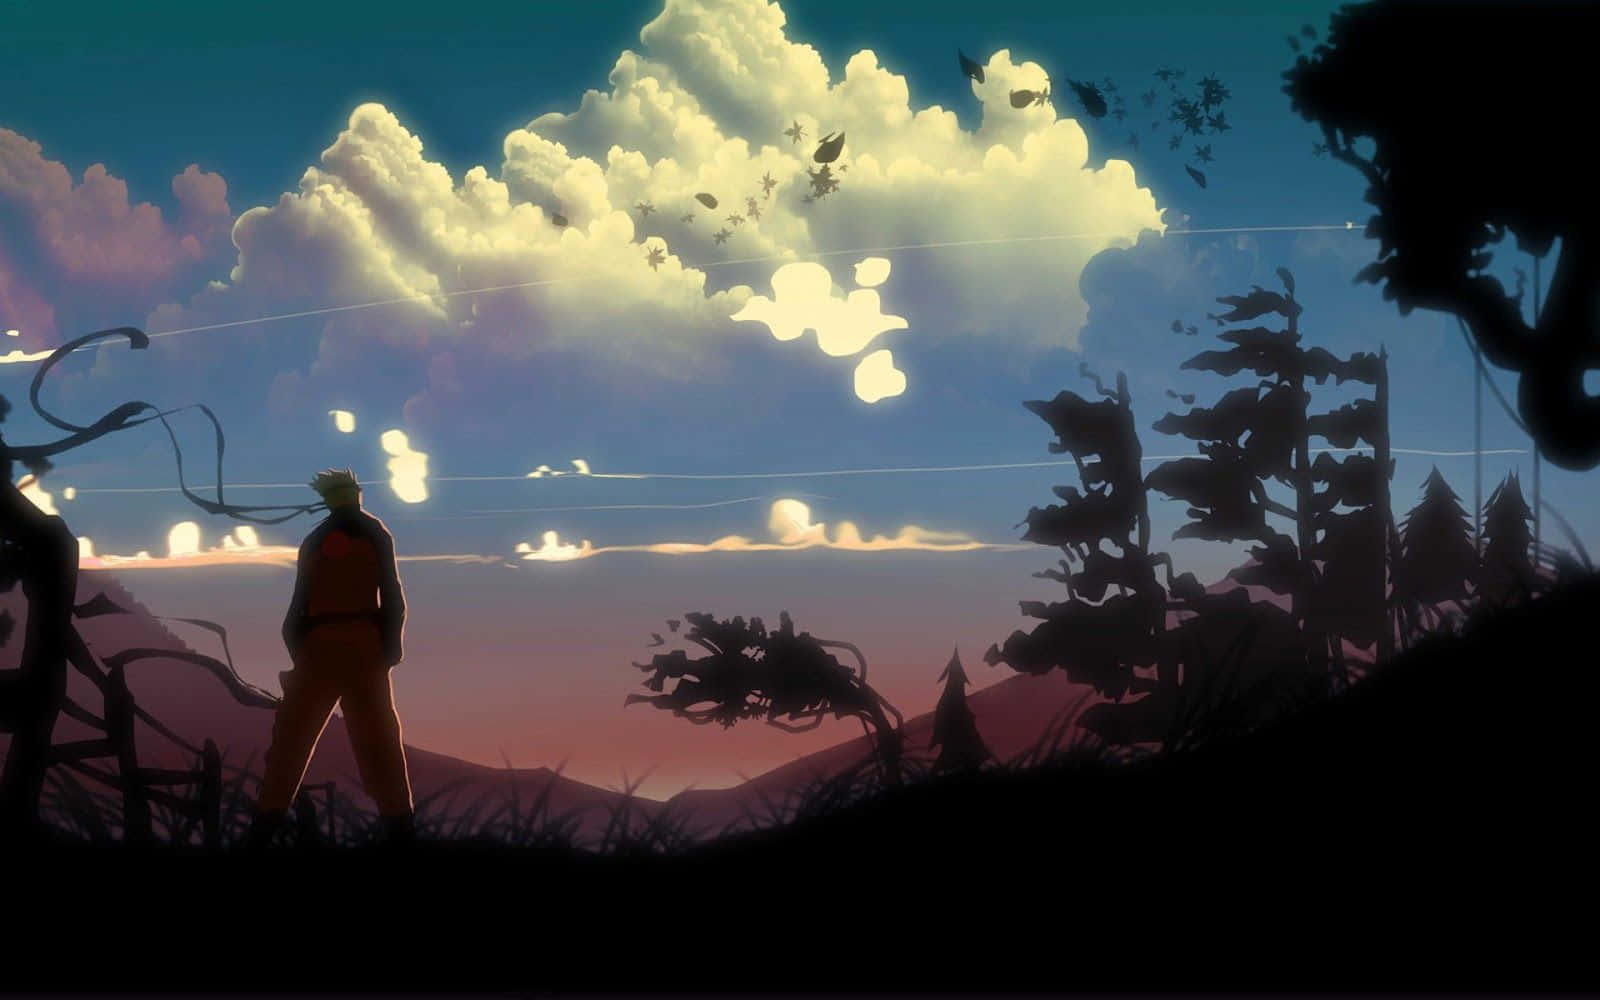 "The Beauty of the Naruto Scenery" Wallpaper